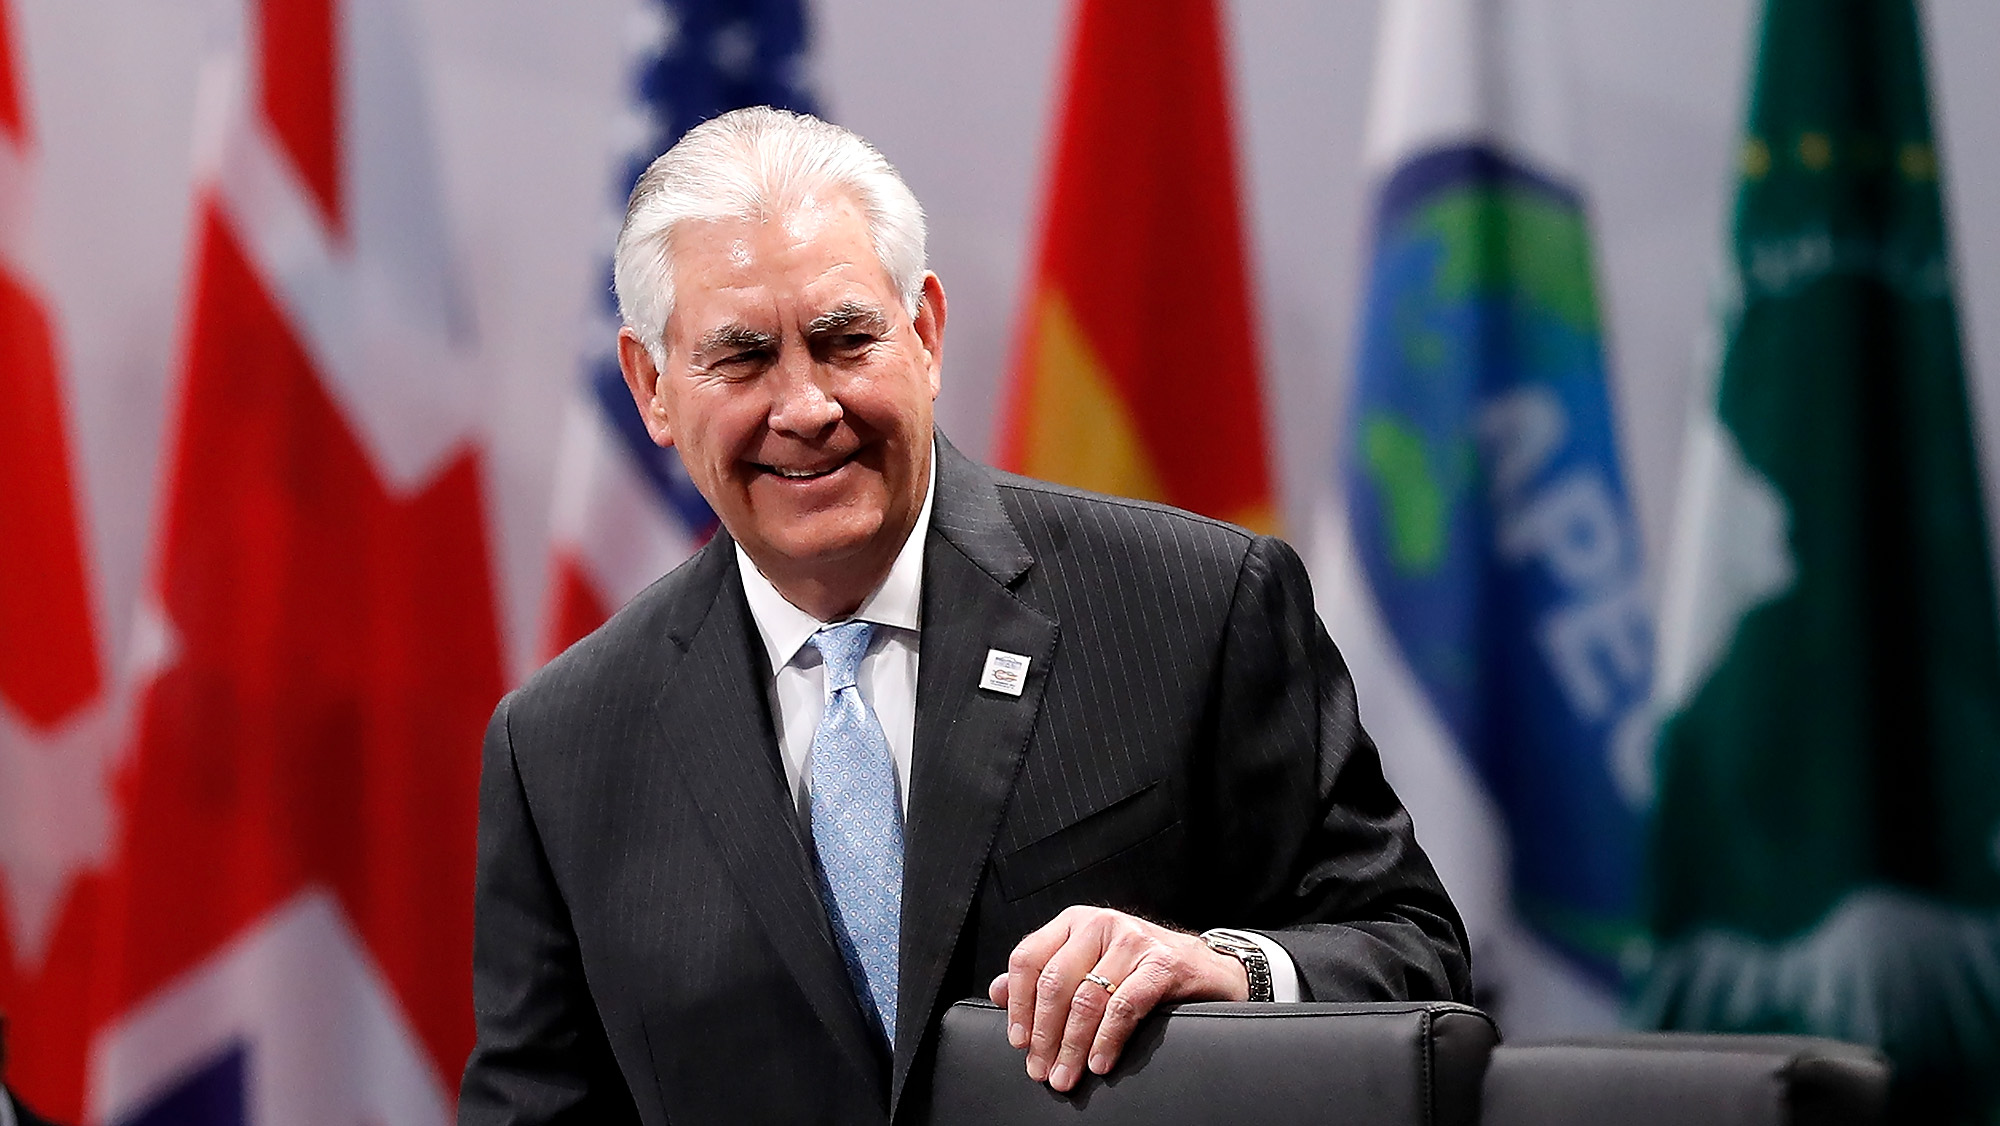 U.S. Secretary of State Rex Tillerson attends the opening session at the World Conference Center Bonn (WCCB) on February 16, 2017 in Bonn, Germany. (Photo by Friedemann Vogel/Pool—Getty Images)